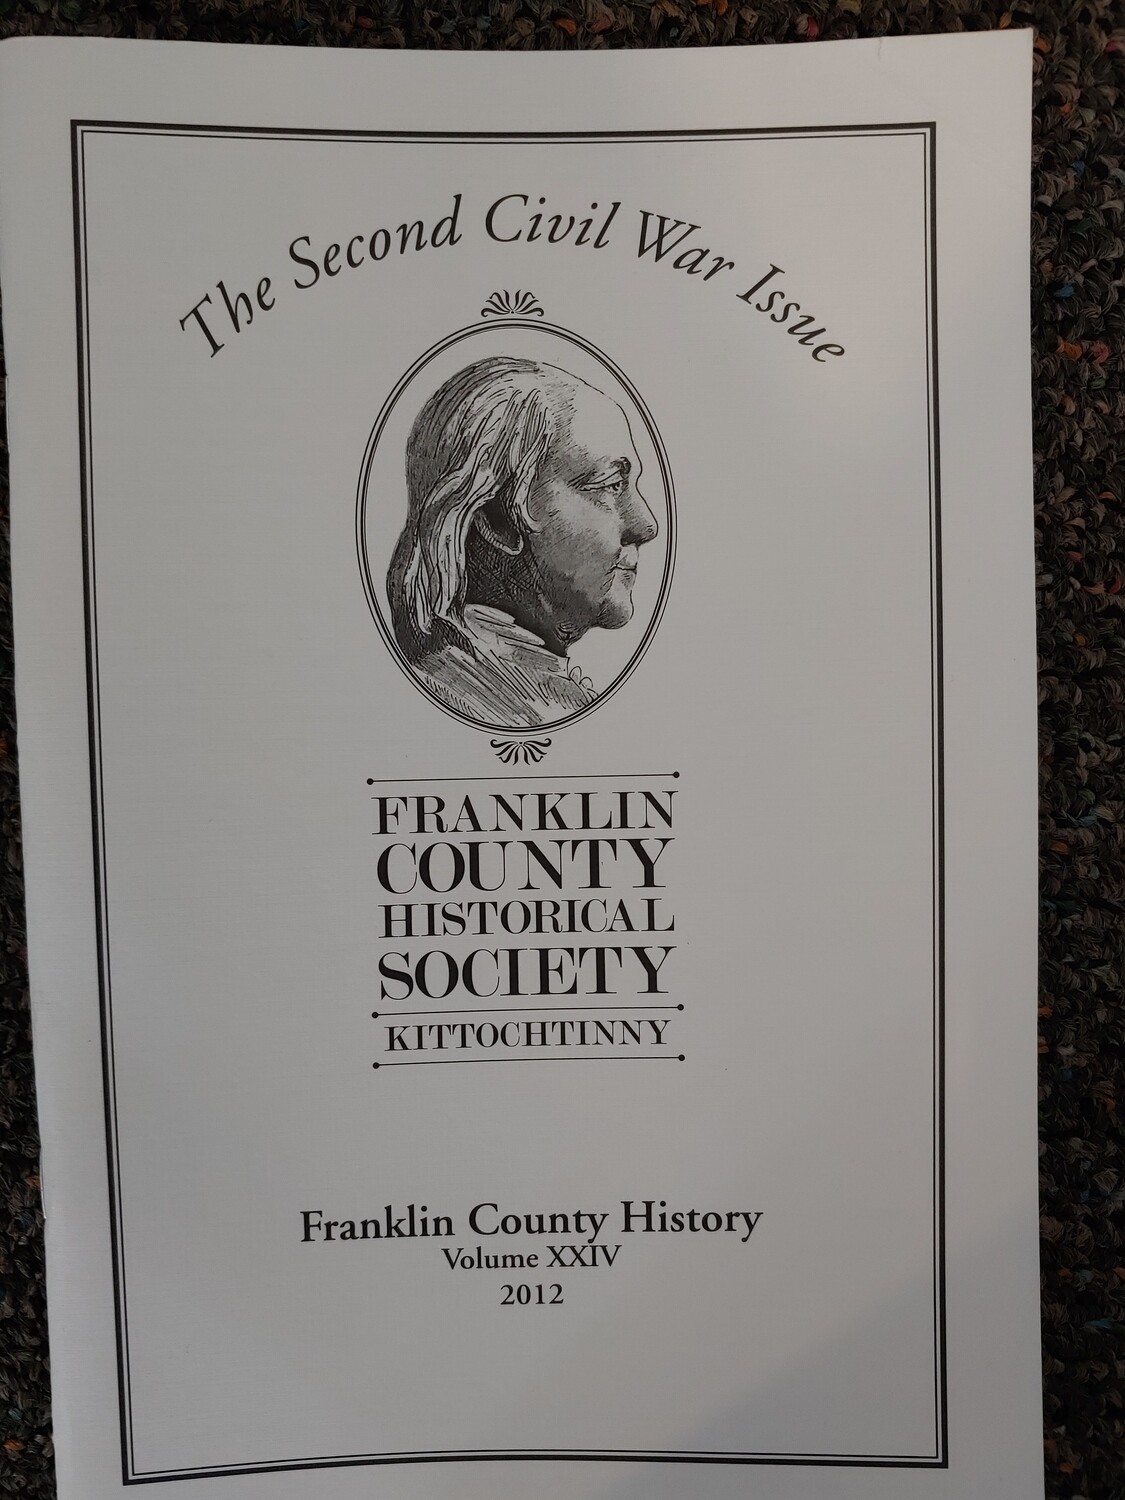 Franklin County Historical Society Journal 2012